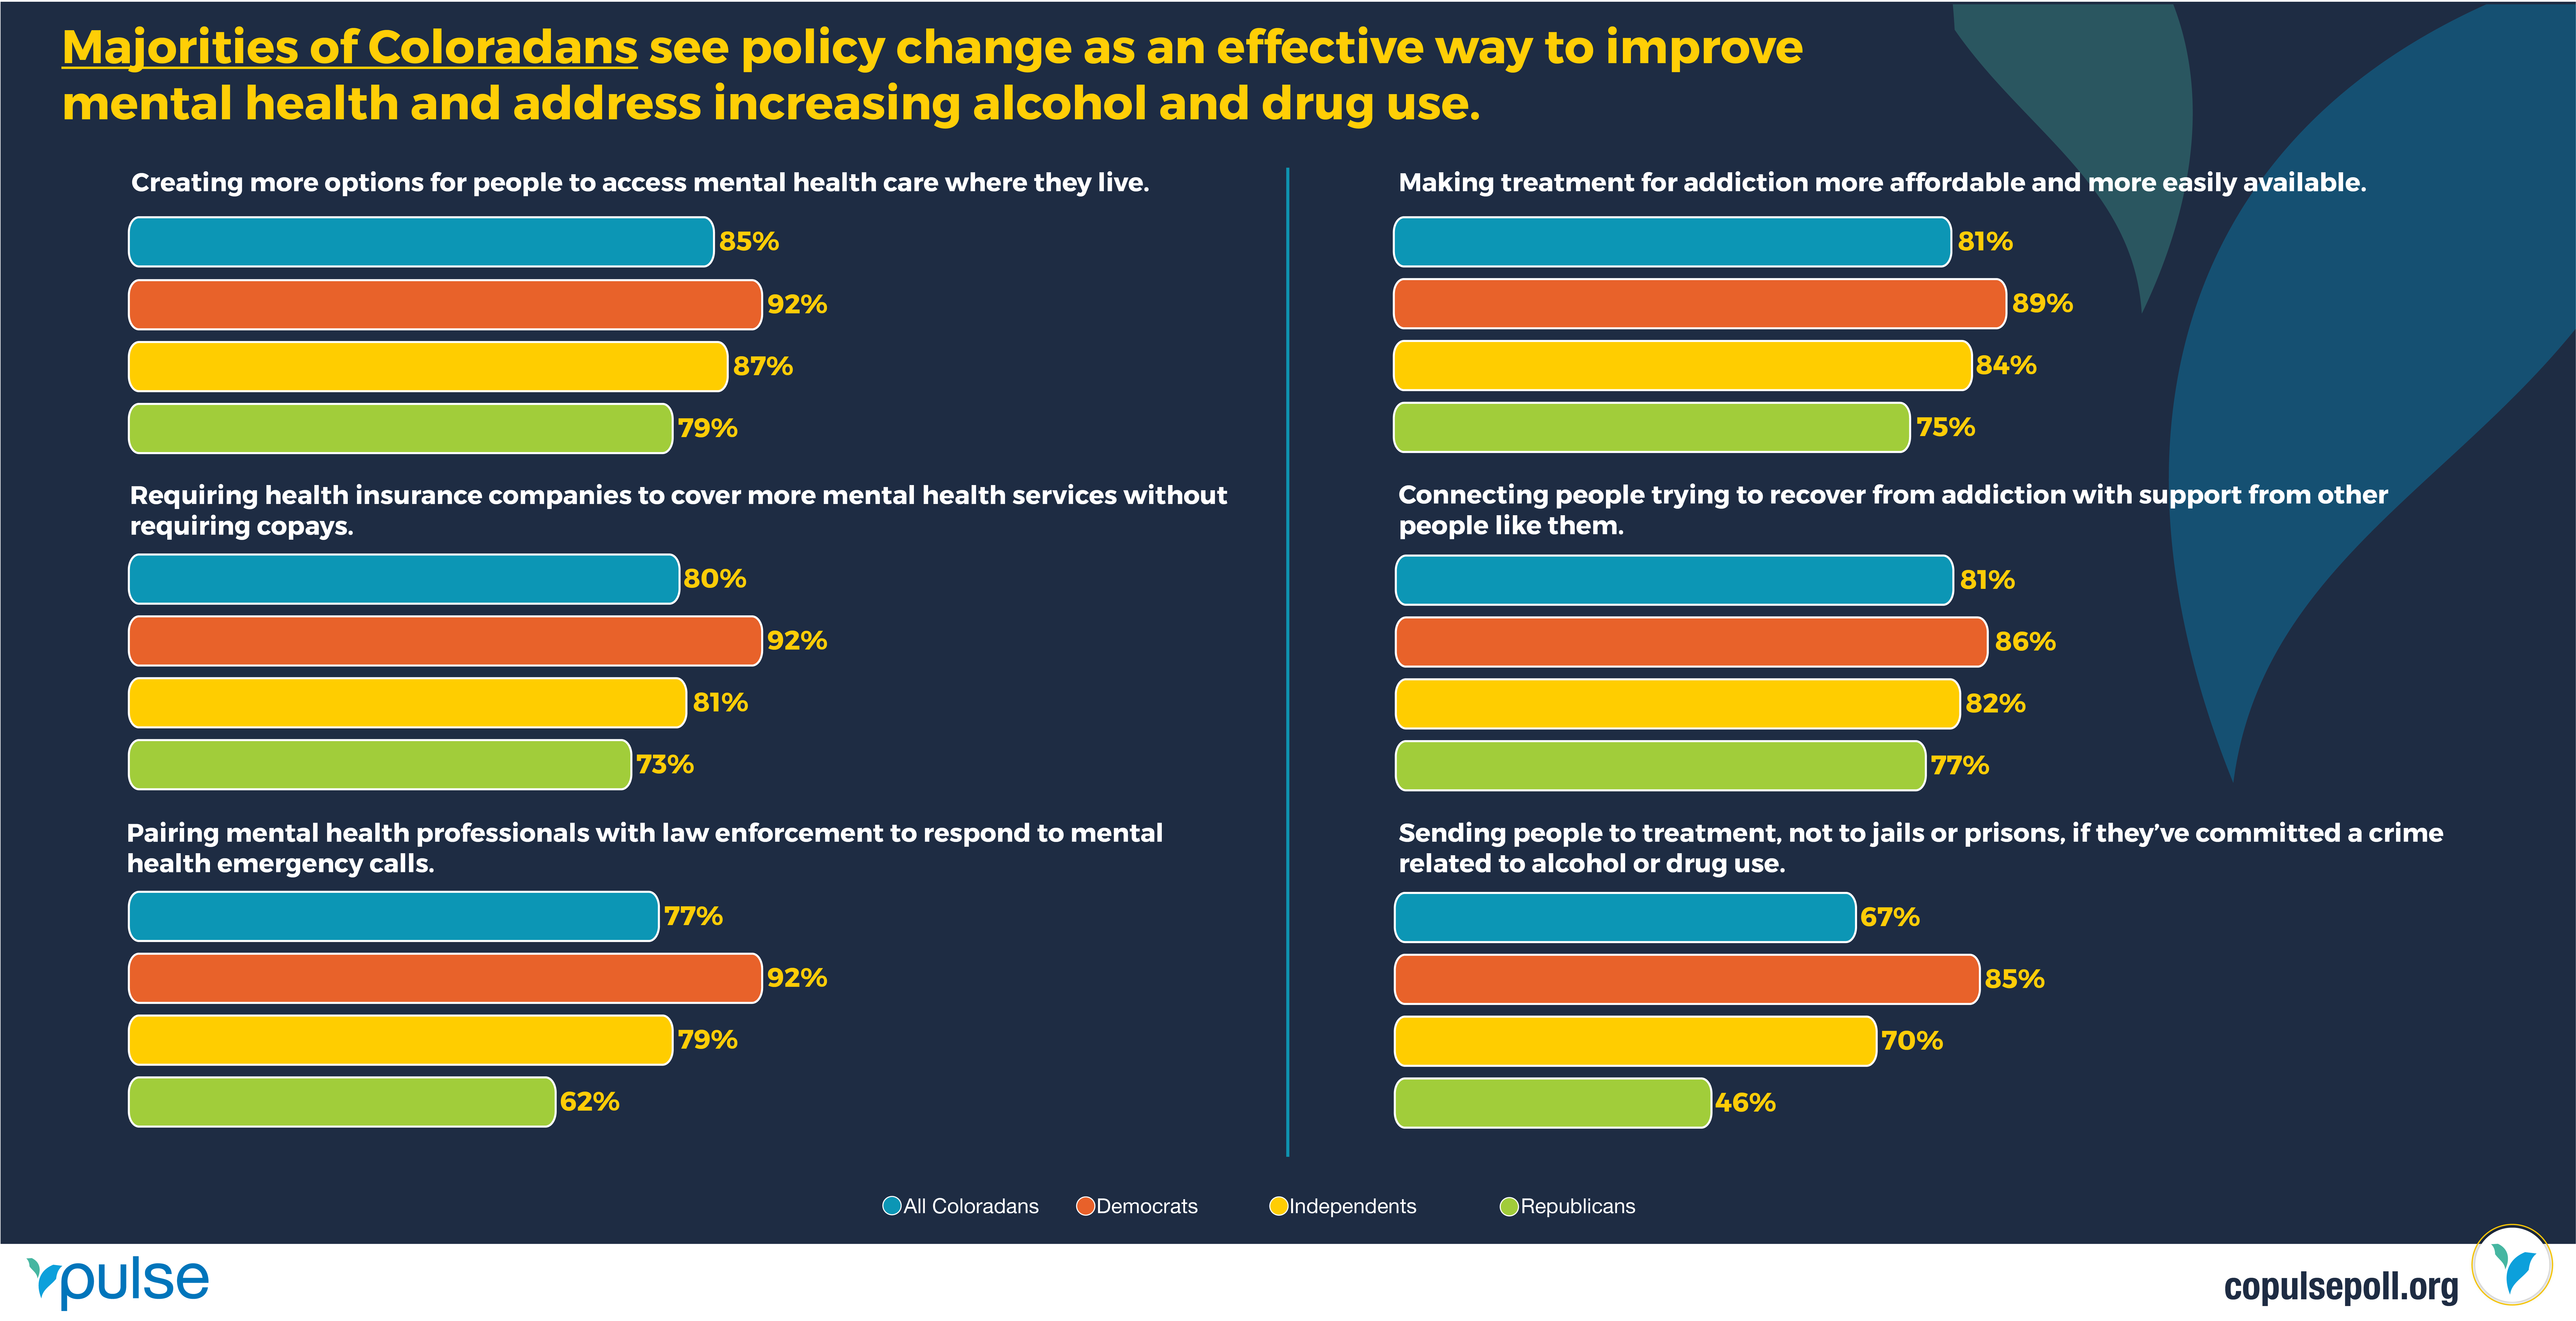 GRAPHIC: A majority of Democratic, Independent, and Republican respondents believe the following actions would offer effective solutions for improving mental health in Colorado:    Creating more options for people to access mental health care where they live (85%). Democrat 92%, Independent 87%, Republican 79%  Requiring health insurance companies to cover more mental health services without requiring copays (80%). Democrat 92%, Independent 81%, Republican 73%  Pairing mental health professionals with law enforcement to respond to mental health emergency calls (77%).  Democrat 92%, Independent 79%, Republican 62%  When it comes to the most effective actions that could address increasing rates of alcohol and drug use, Coloradans demonstrate enthusiasm for:  Making treatment for addiction more affordable and more easily available (81%) Democrat 89%, Independent 84%, Republican 75%  Connecting people trying to recover from addiction with support from other people like them (81%). Democrat 86%, Independent 82%, Republican 77%  Investing in programs to prevent people from abusing alcohol and drugs (68%). Democrat 74%, Independent 71%, Republican 59%  Sending people to treatment, not to jails or prisons, if they’ve committed a crime related to alcohol or drug use (67%). Democrat 85%, Independent 70%, Republican 46%